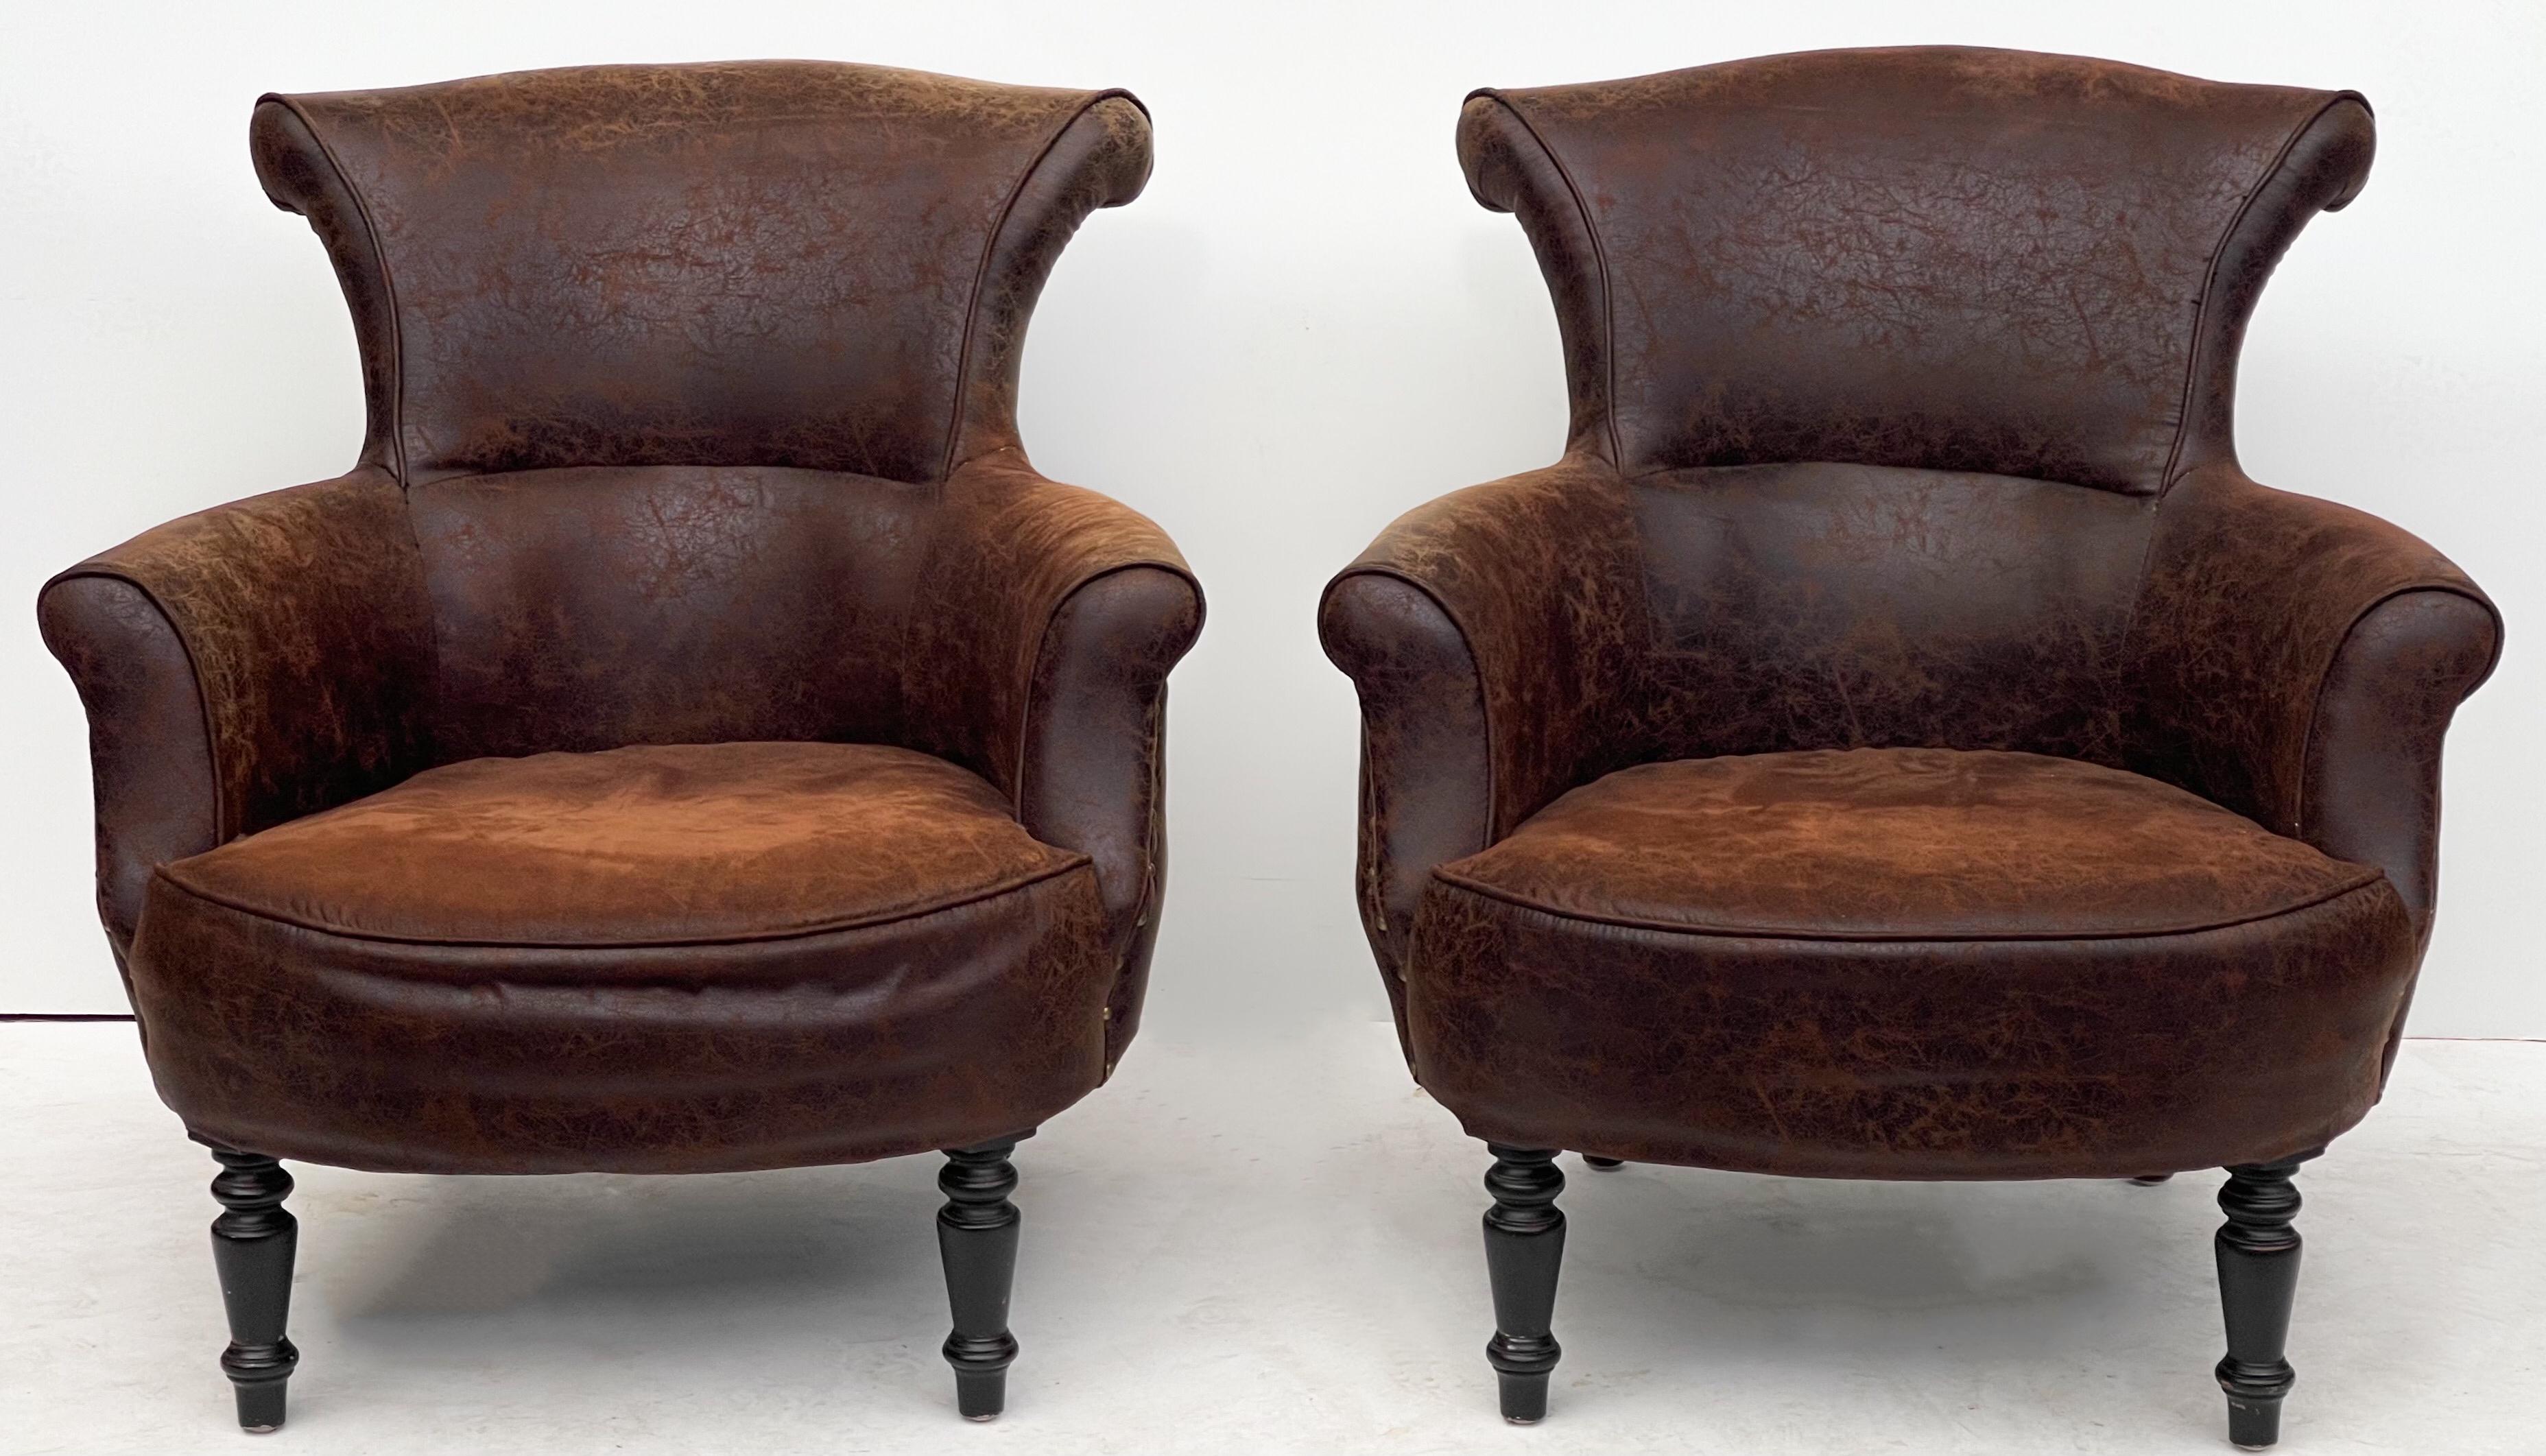 American Classical Ralph Lauren Style Distressed Leather Club Chairs, Pair